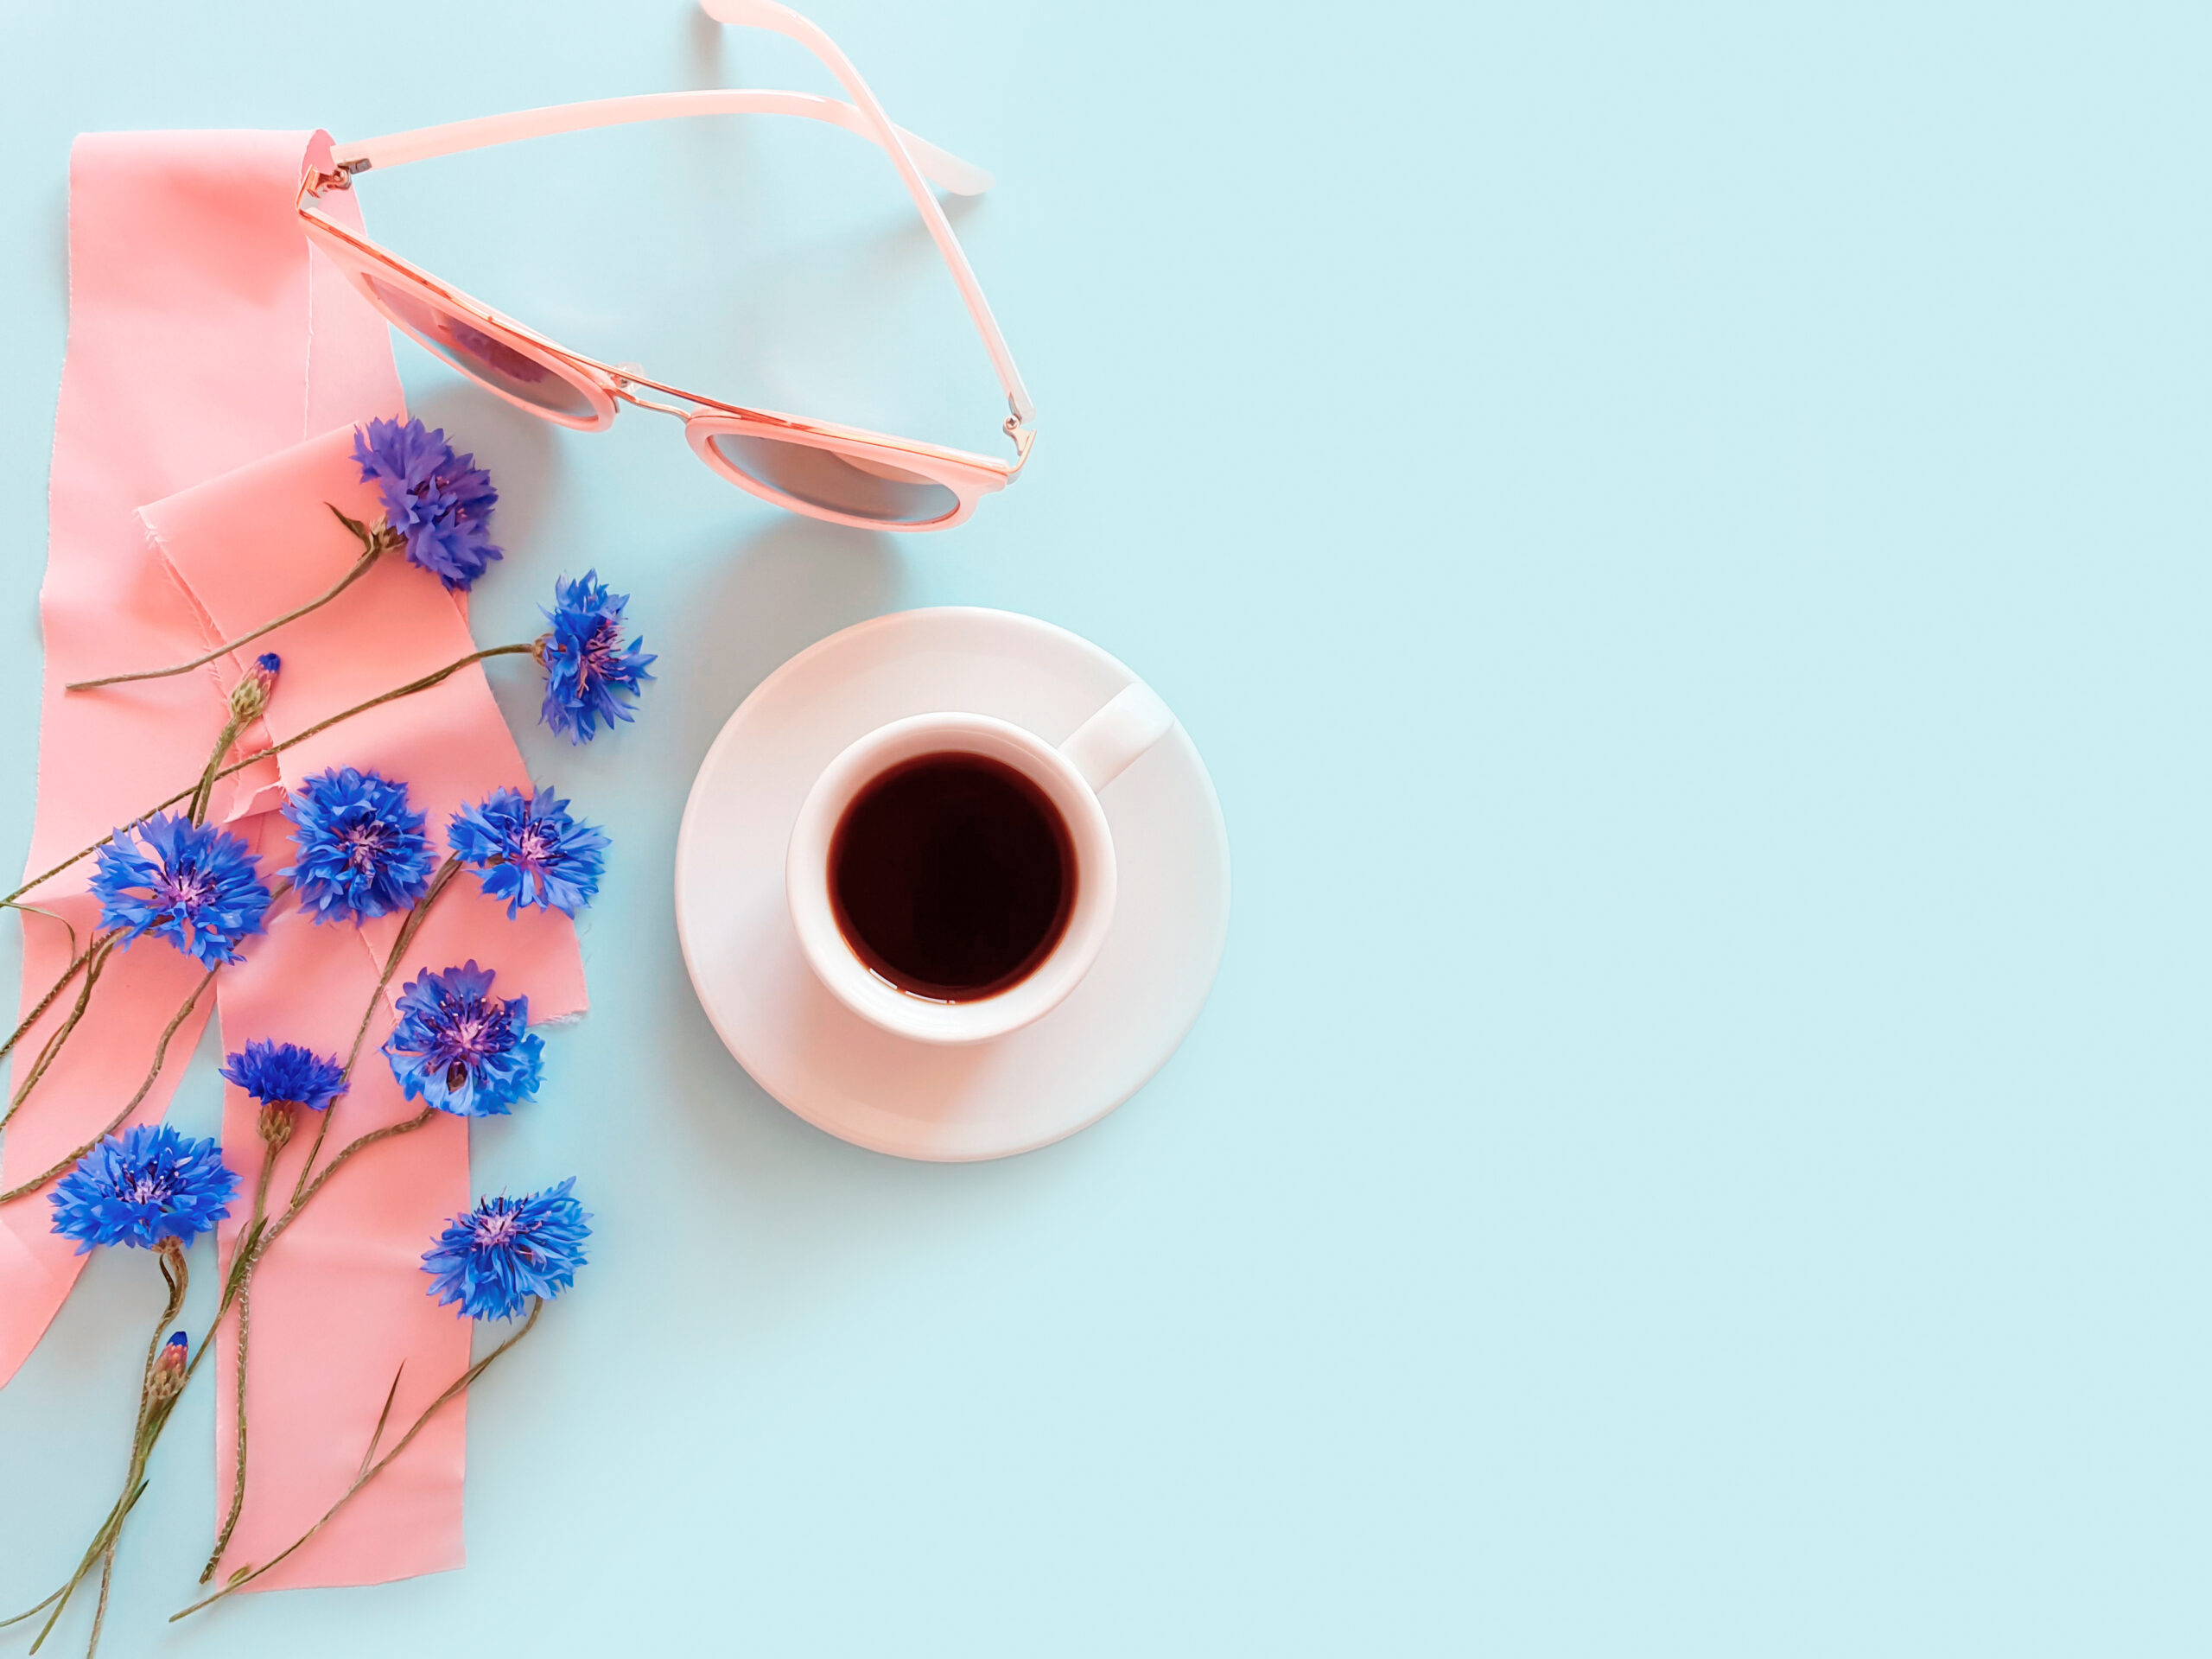 Top view of a cup of coffee with blue cornflowers, pink sunglasses and pink silk ribbon on a pastel blue background.